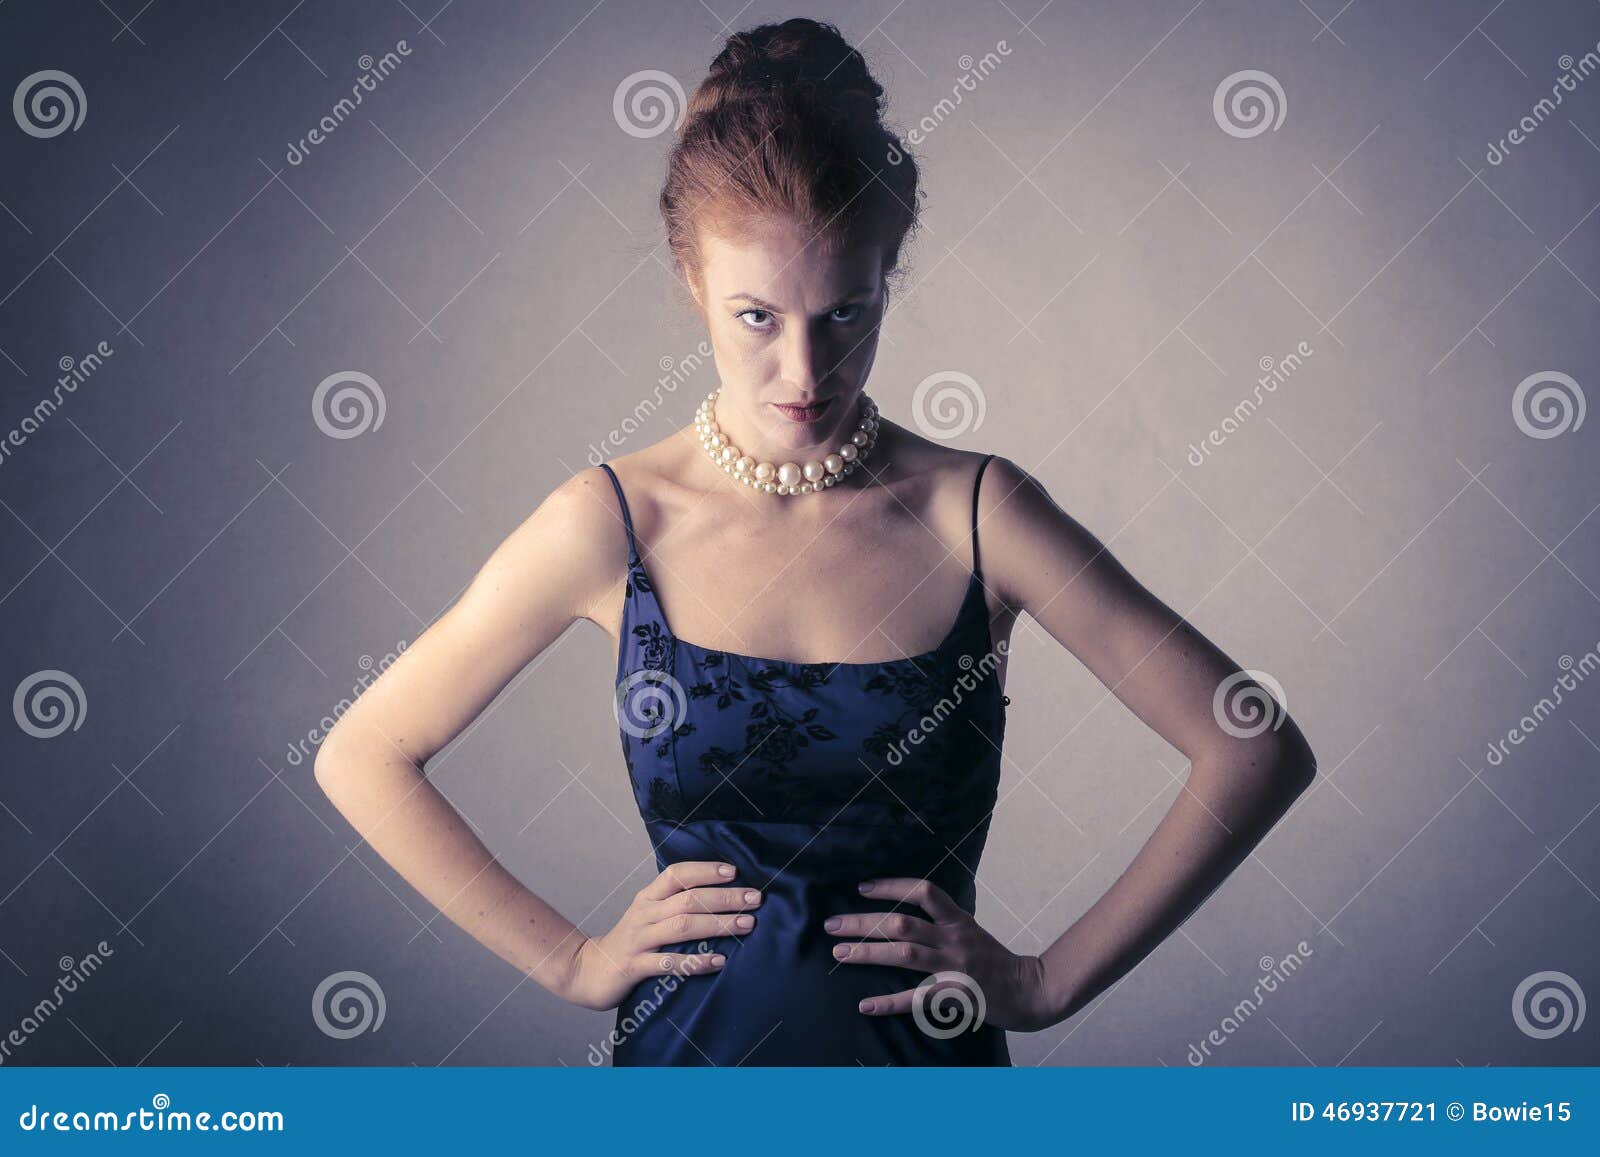 angry classy woman